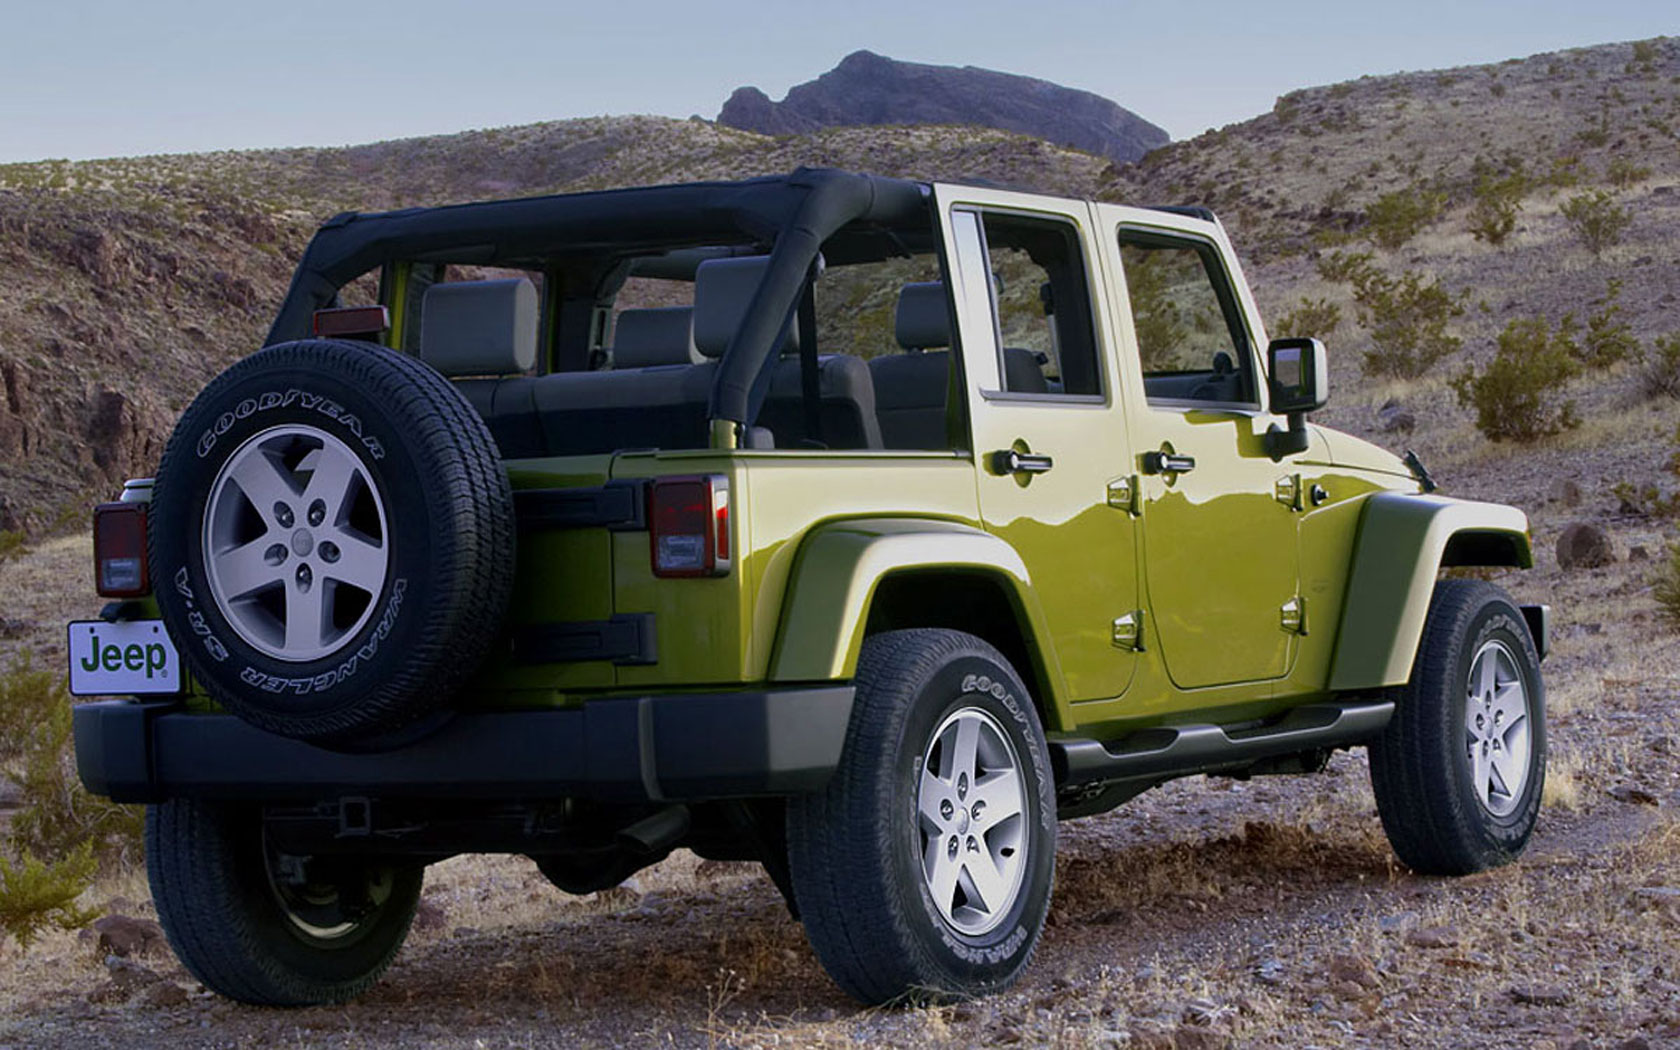  Jeep Wrangler Unlimited (2006-2018)